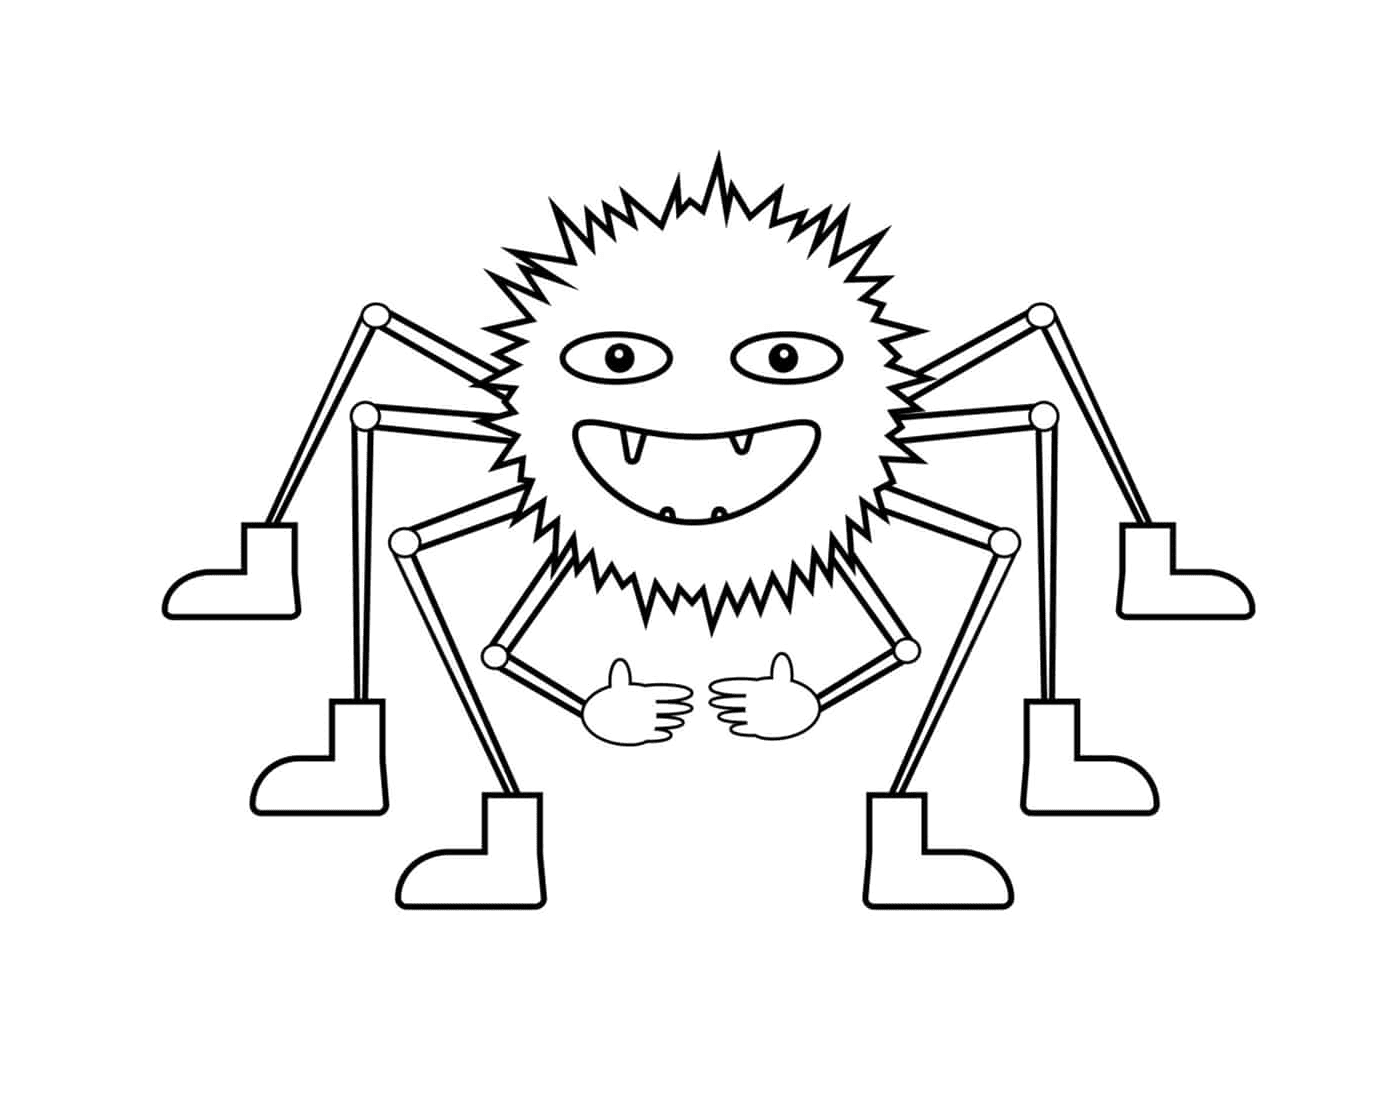  A spider with multiple legs 